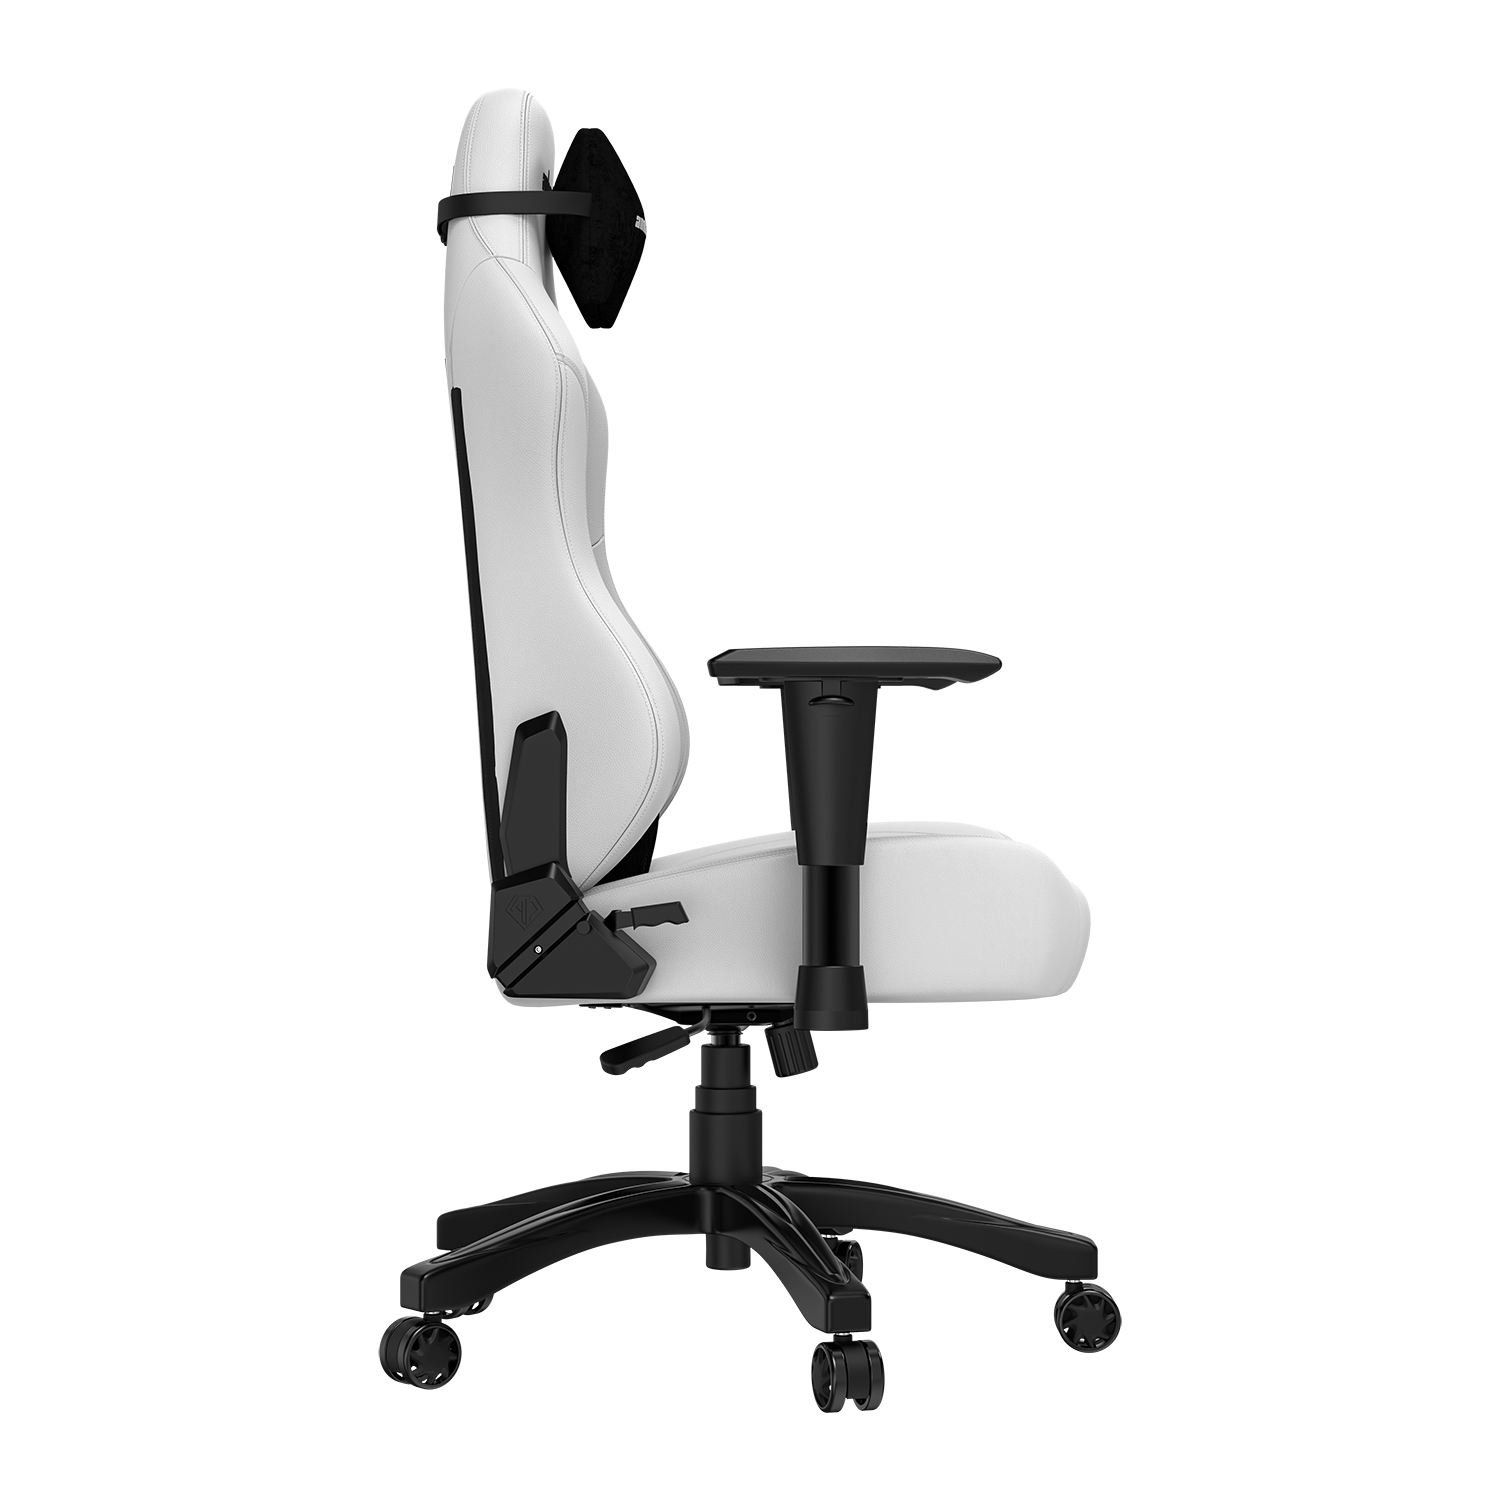 ANDA SEAT PHANTOM 3 L SIZE DURAXTRA LEATHERETTE - CLOUDY WHITE